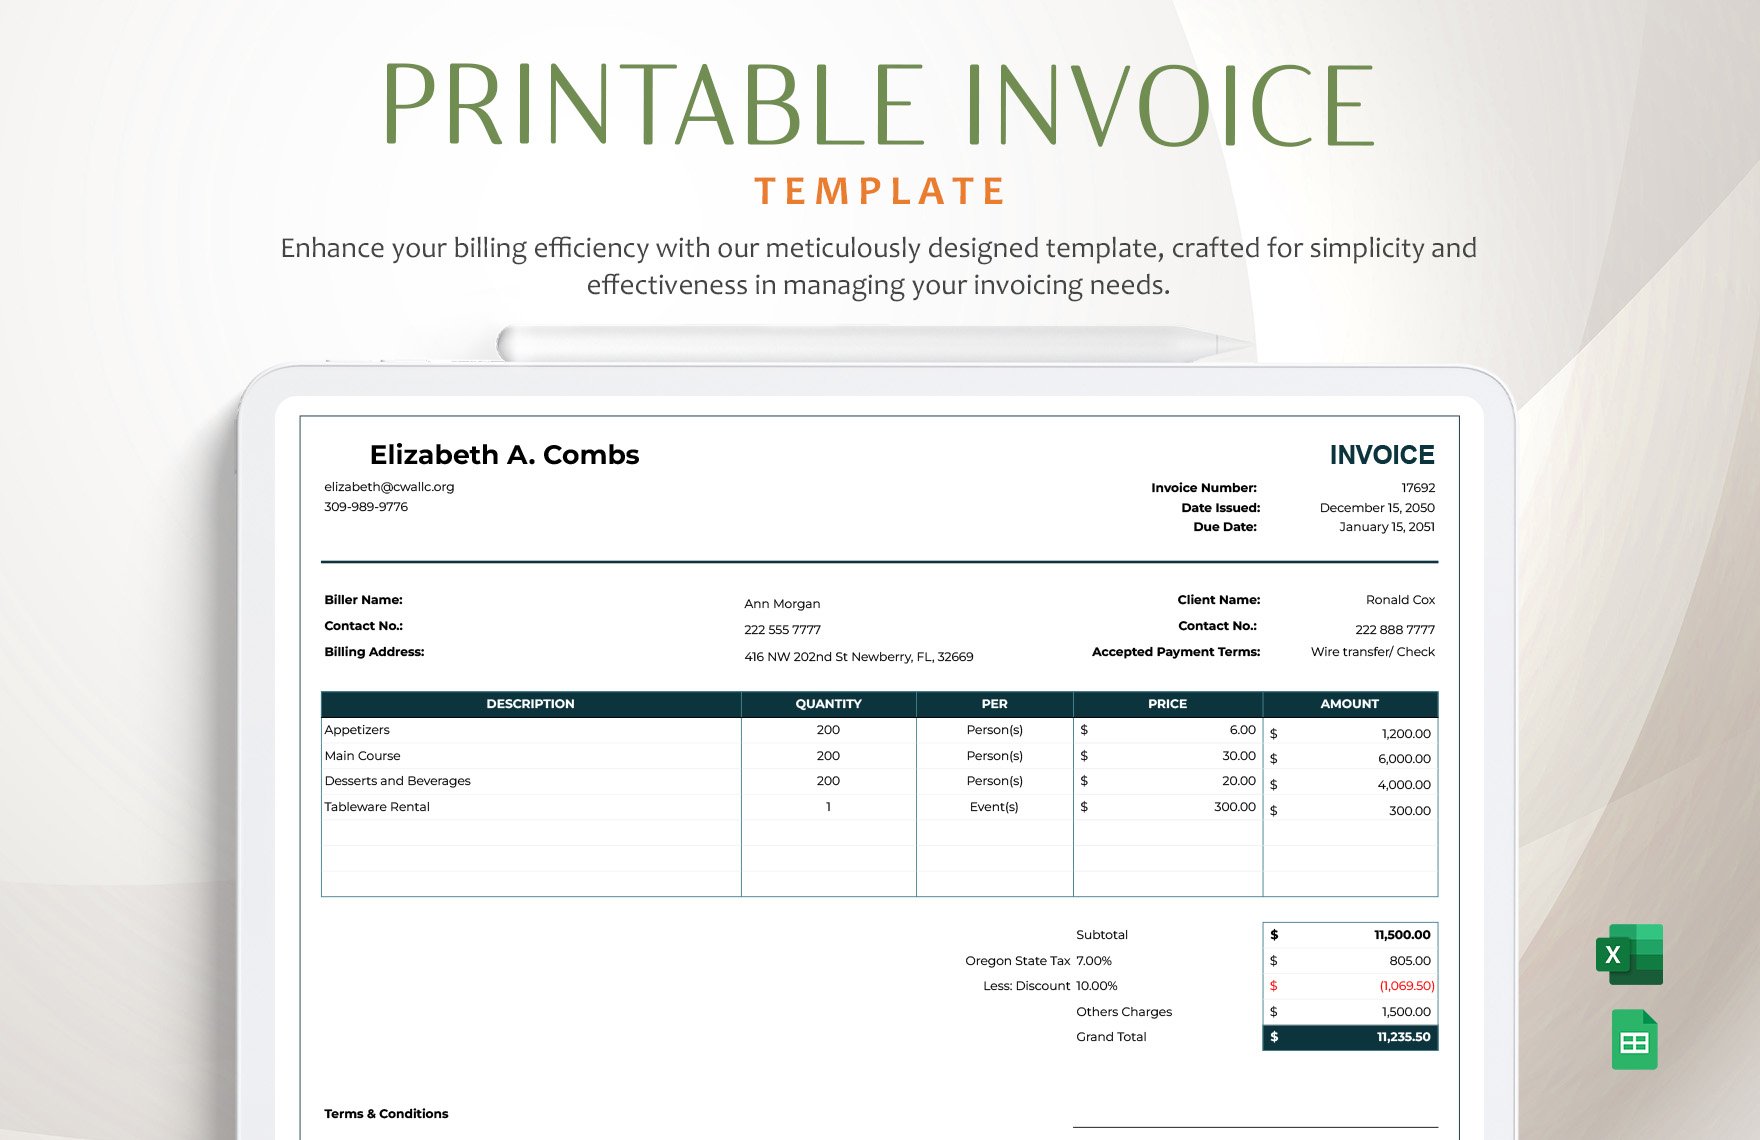 Free Printable Invoice Template in Excel, Google Sheets